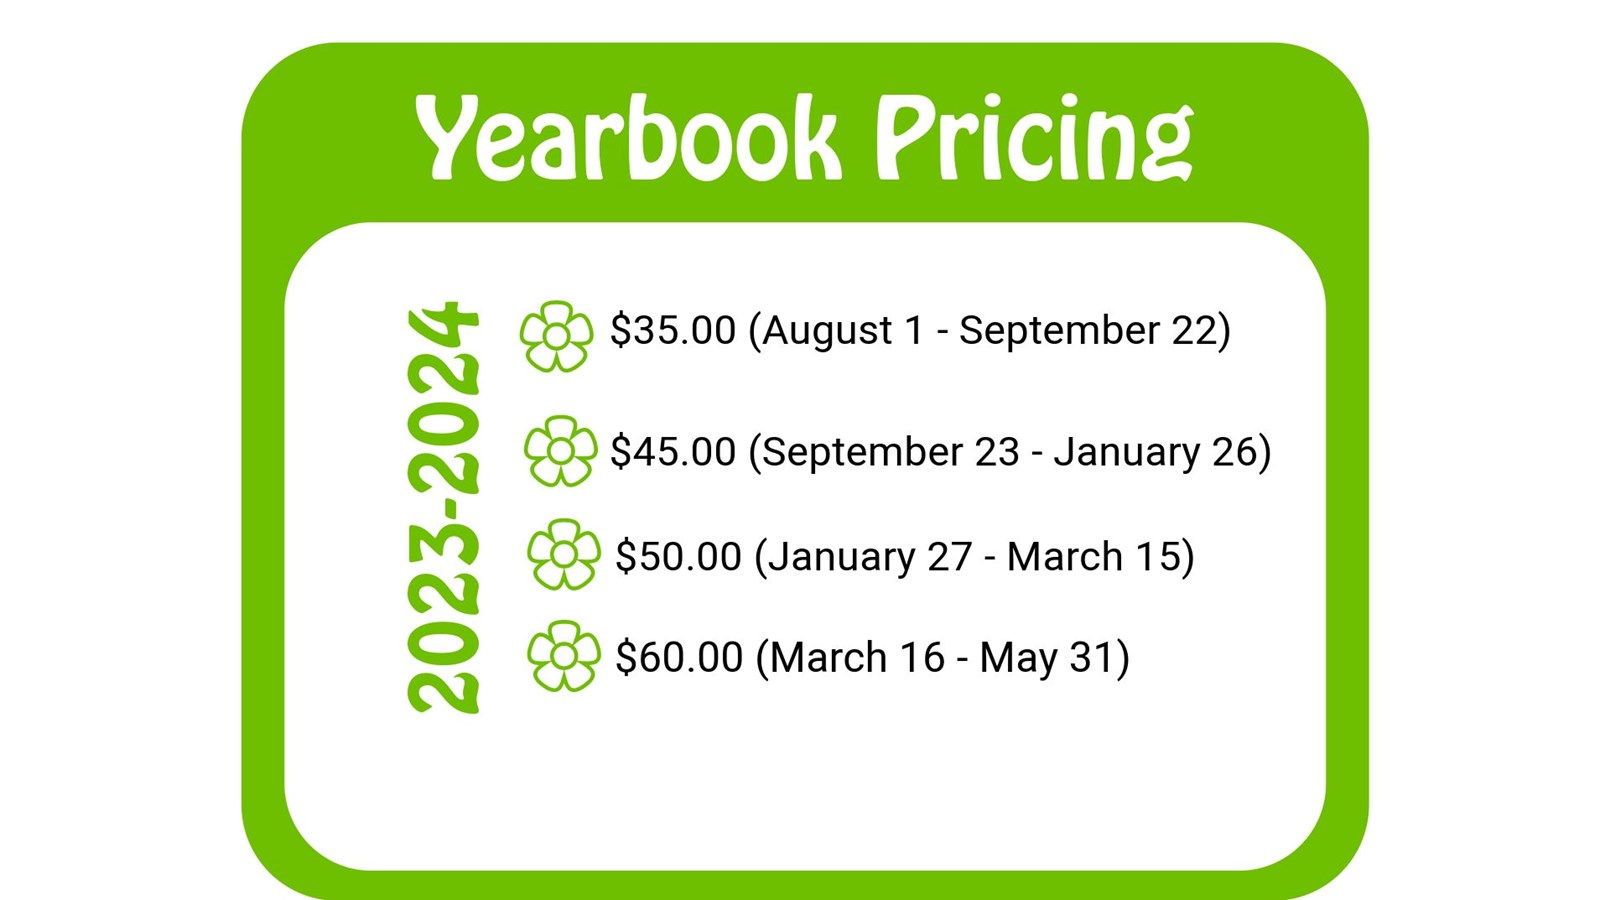 Yearbook Pricing Schedule